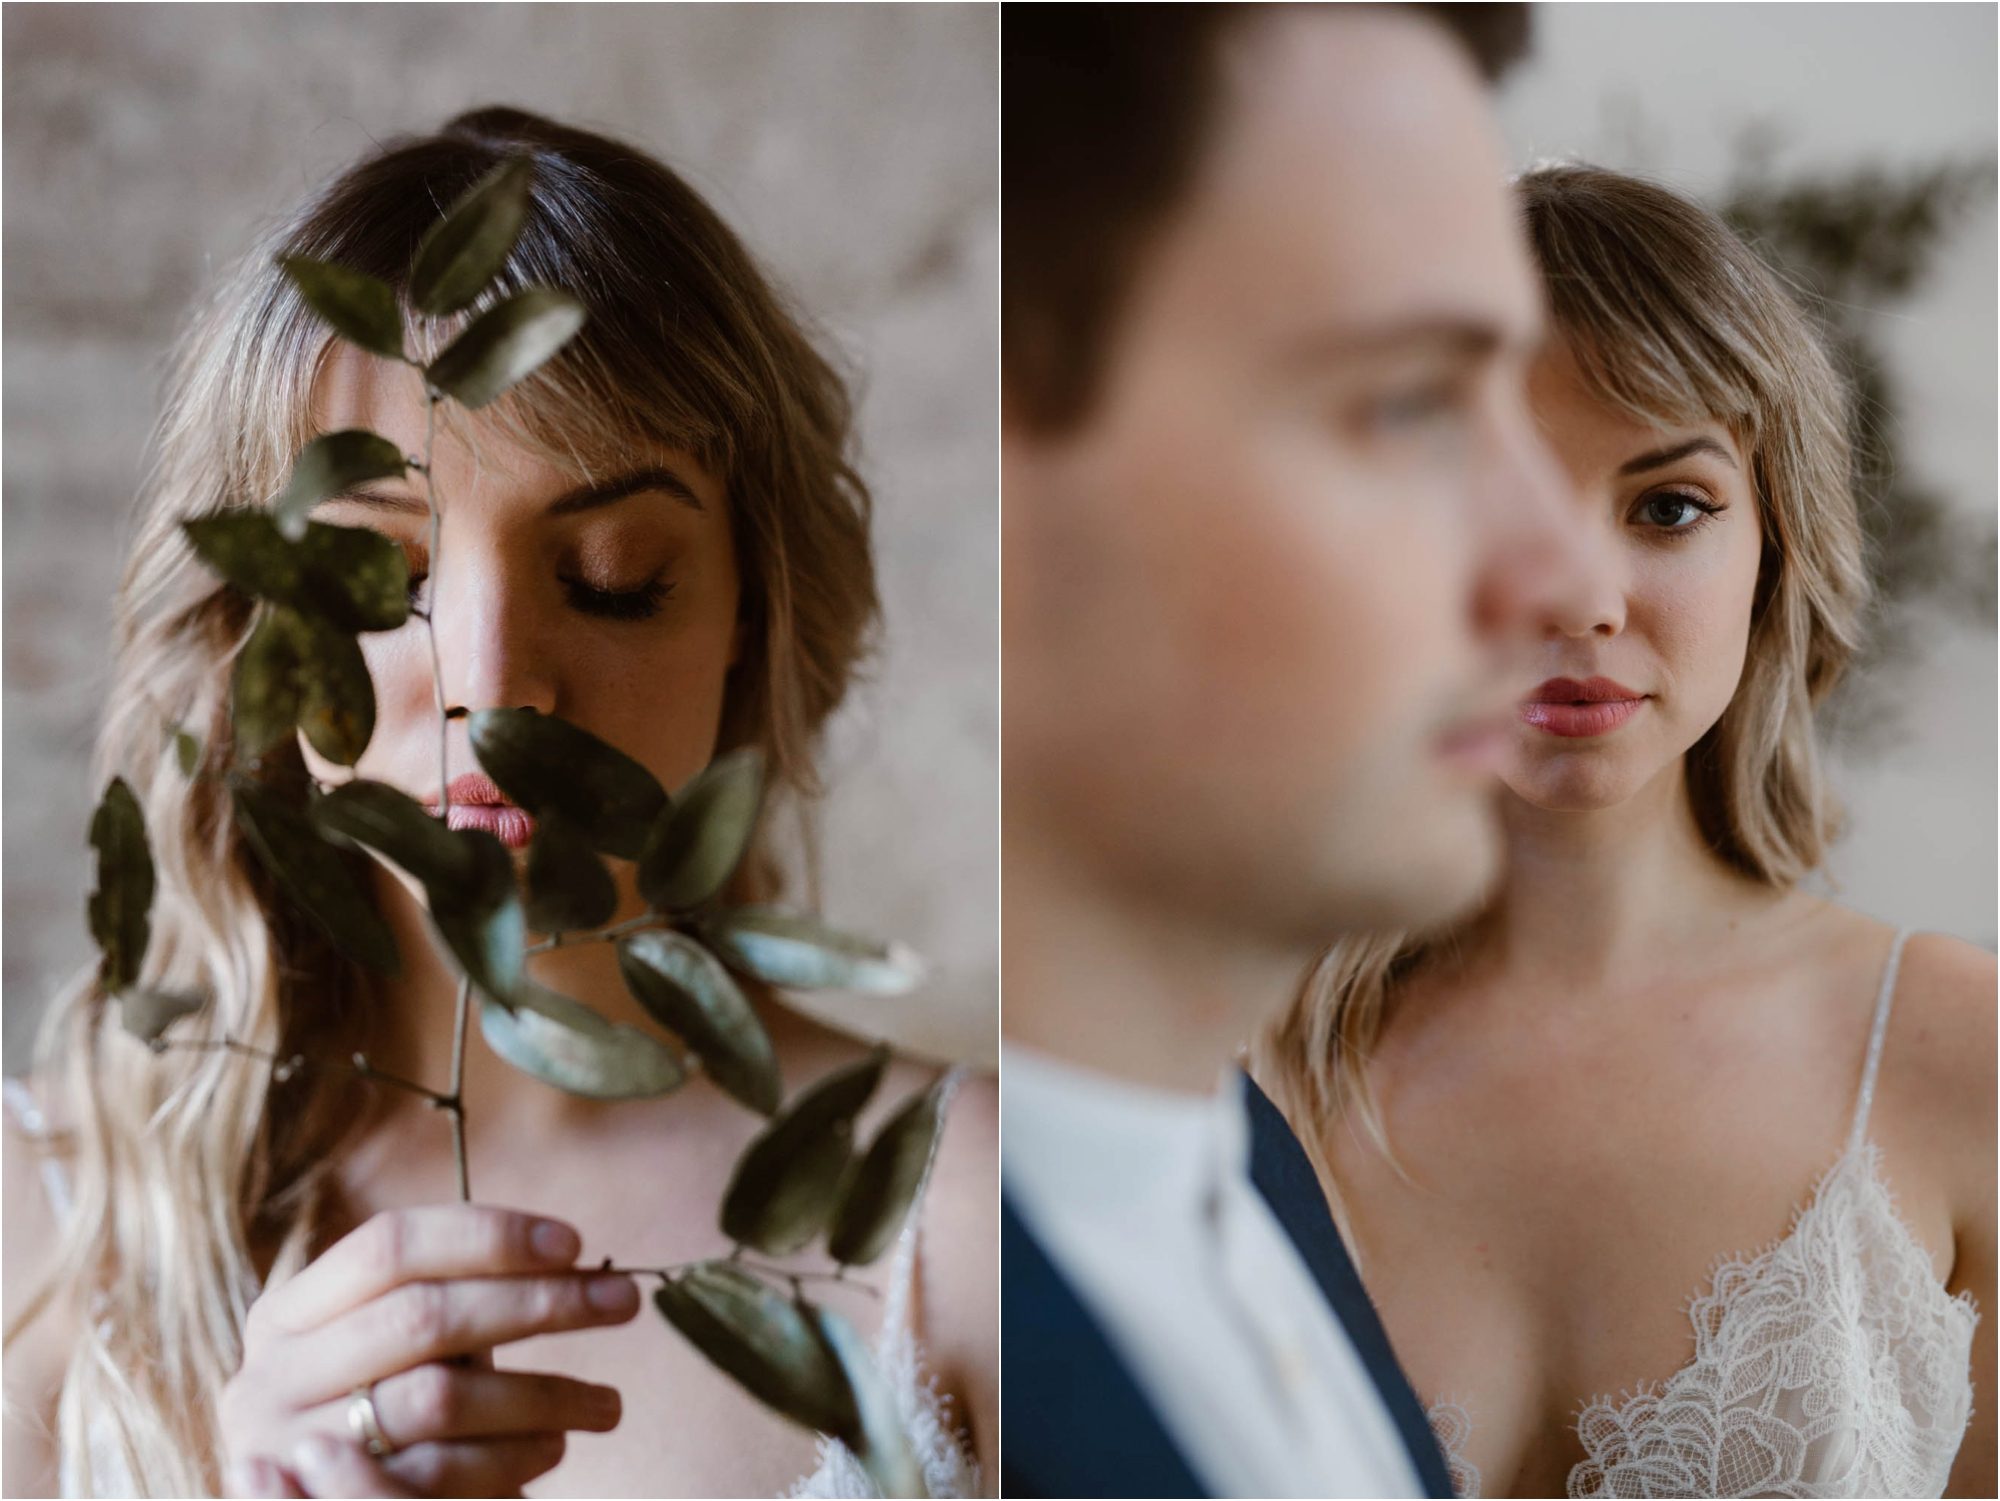 The Cultivate Workshop Styled Shoot Erin Morrison Photography